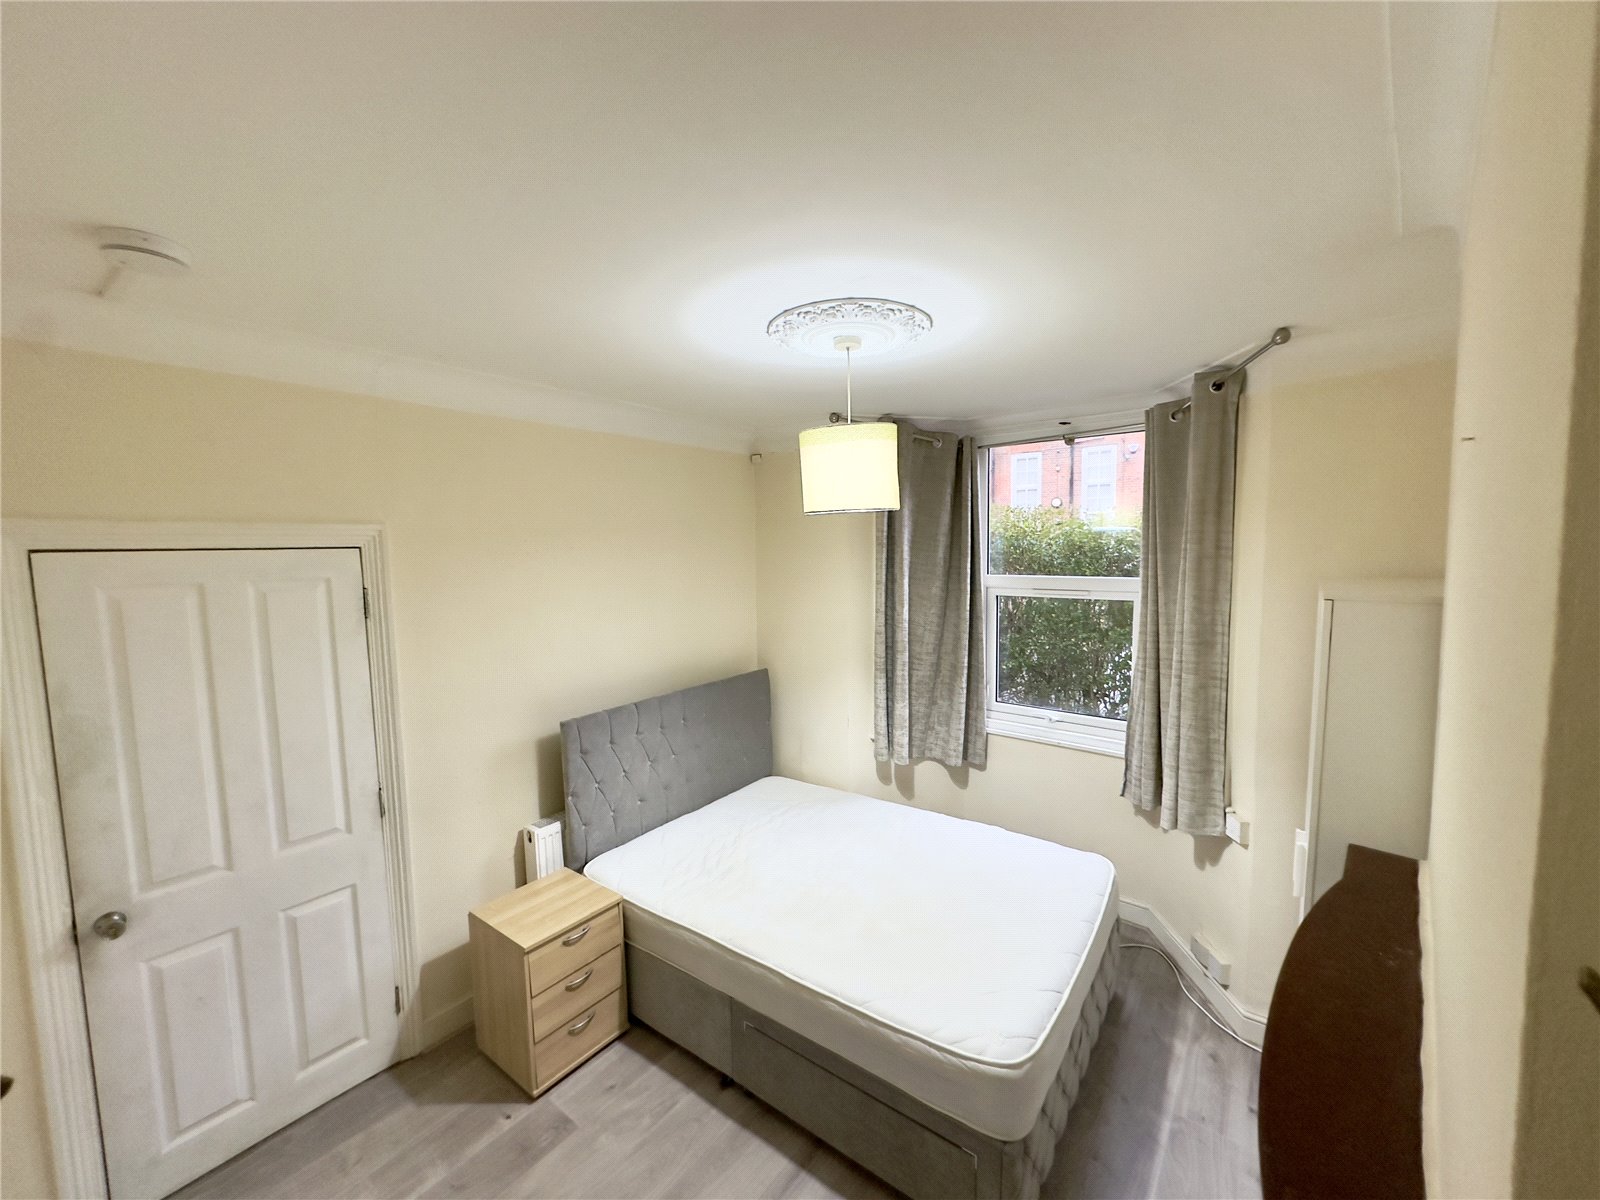 Double Bedroom in Shared House, Hither Green